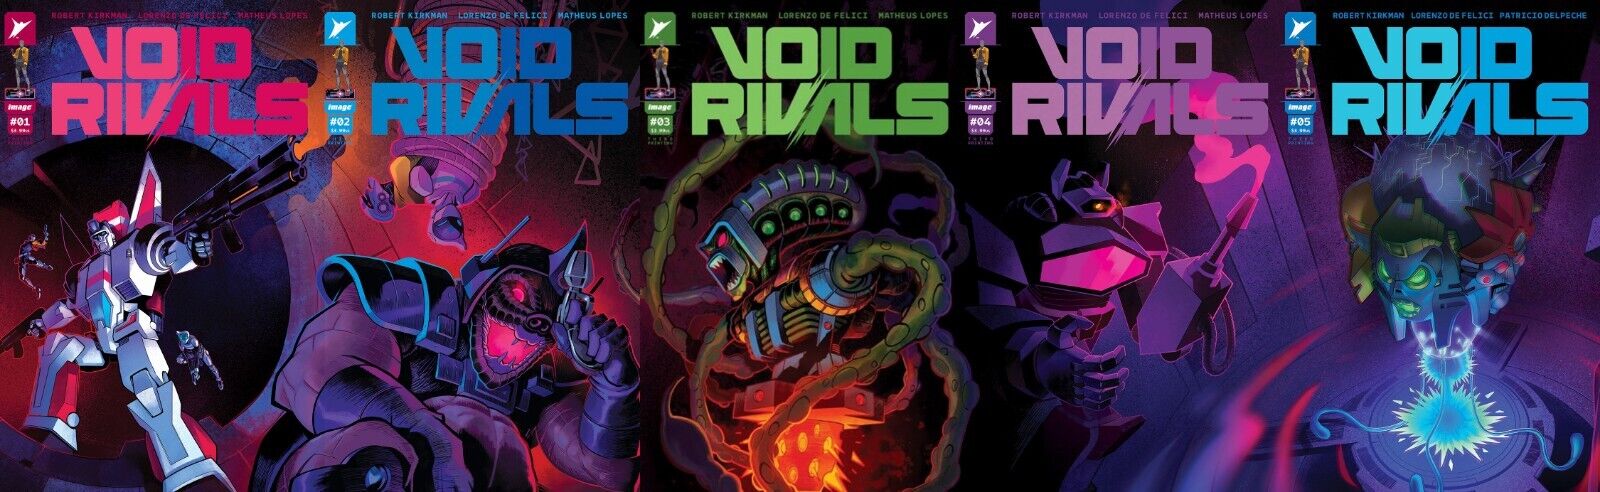 VOID RIVALS 1 2 3 4 & 5 NM FLAVIANO CONNECTING VARIANT SET 